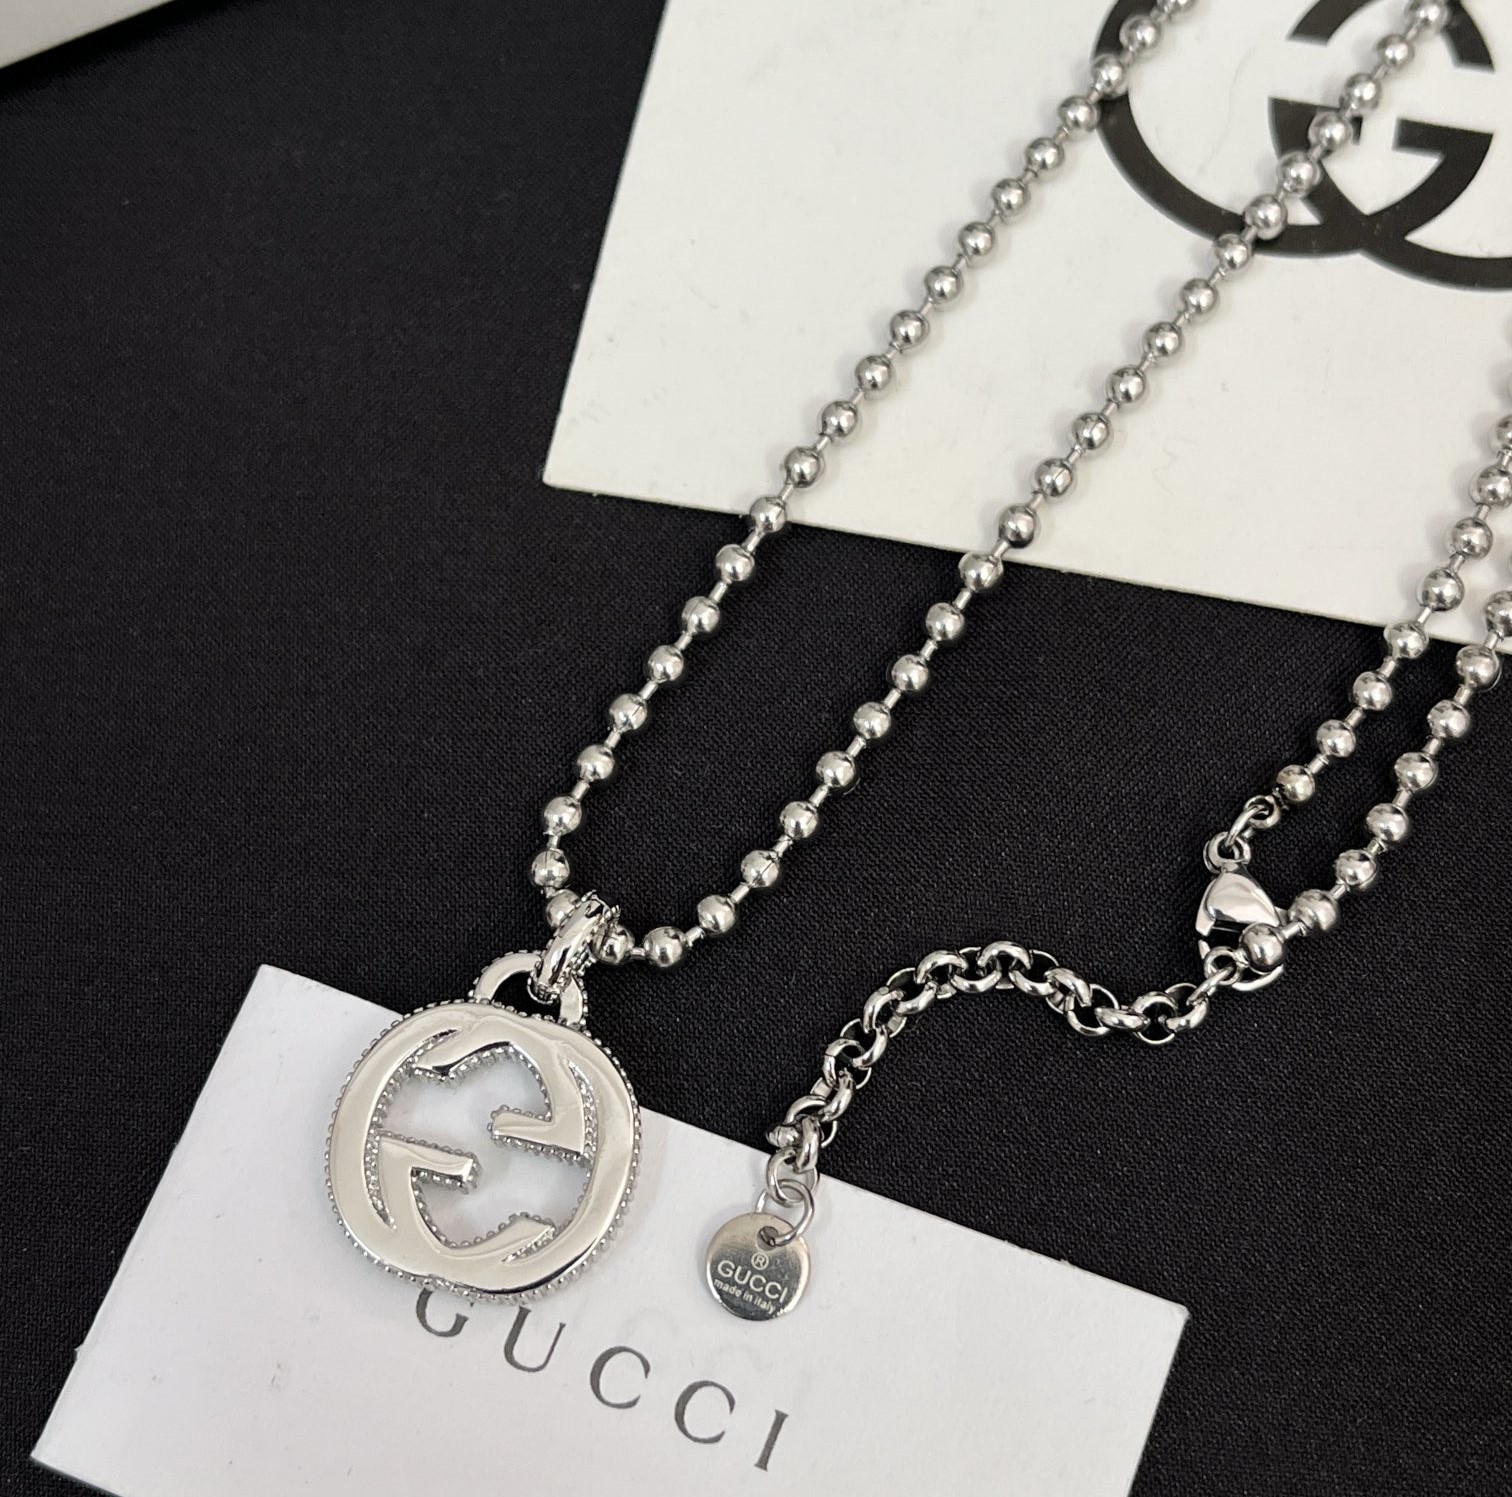 X568 Gucci necklace